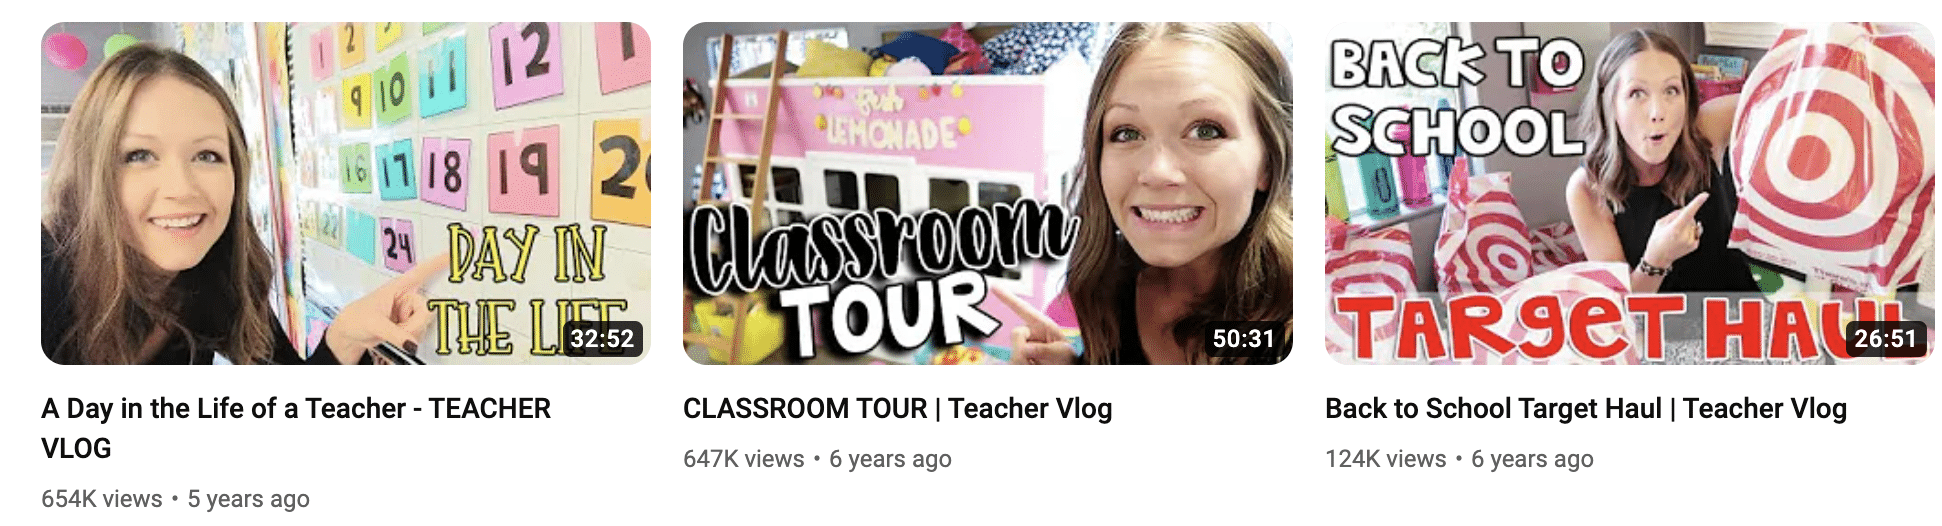 Back to school youtube videos from one of the top teacher youtube channels. 